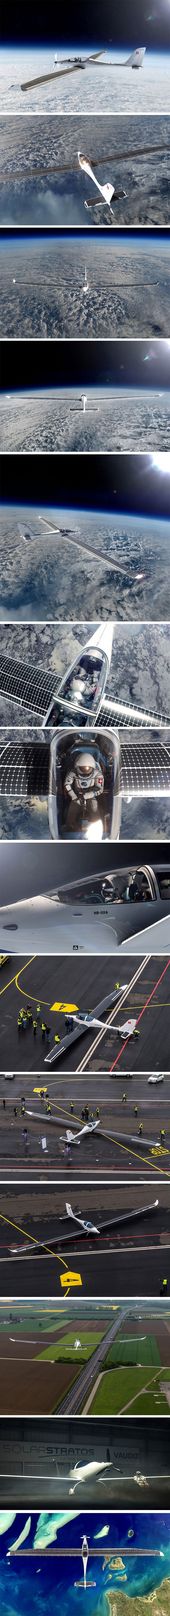 Stratospheric flight without a drop of fuel!